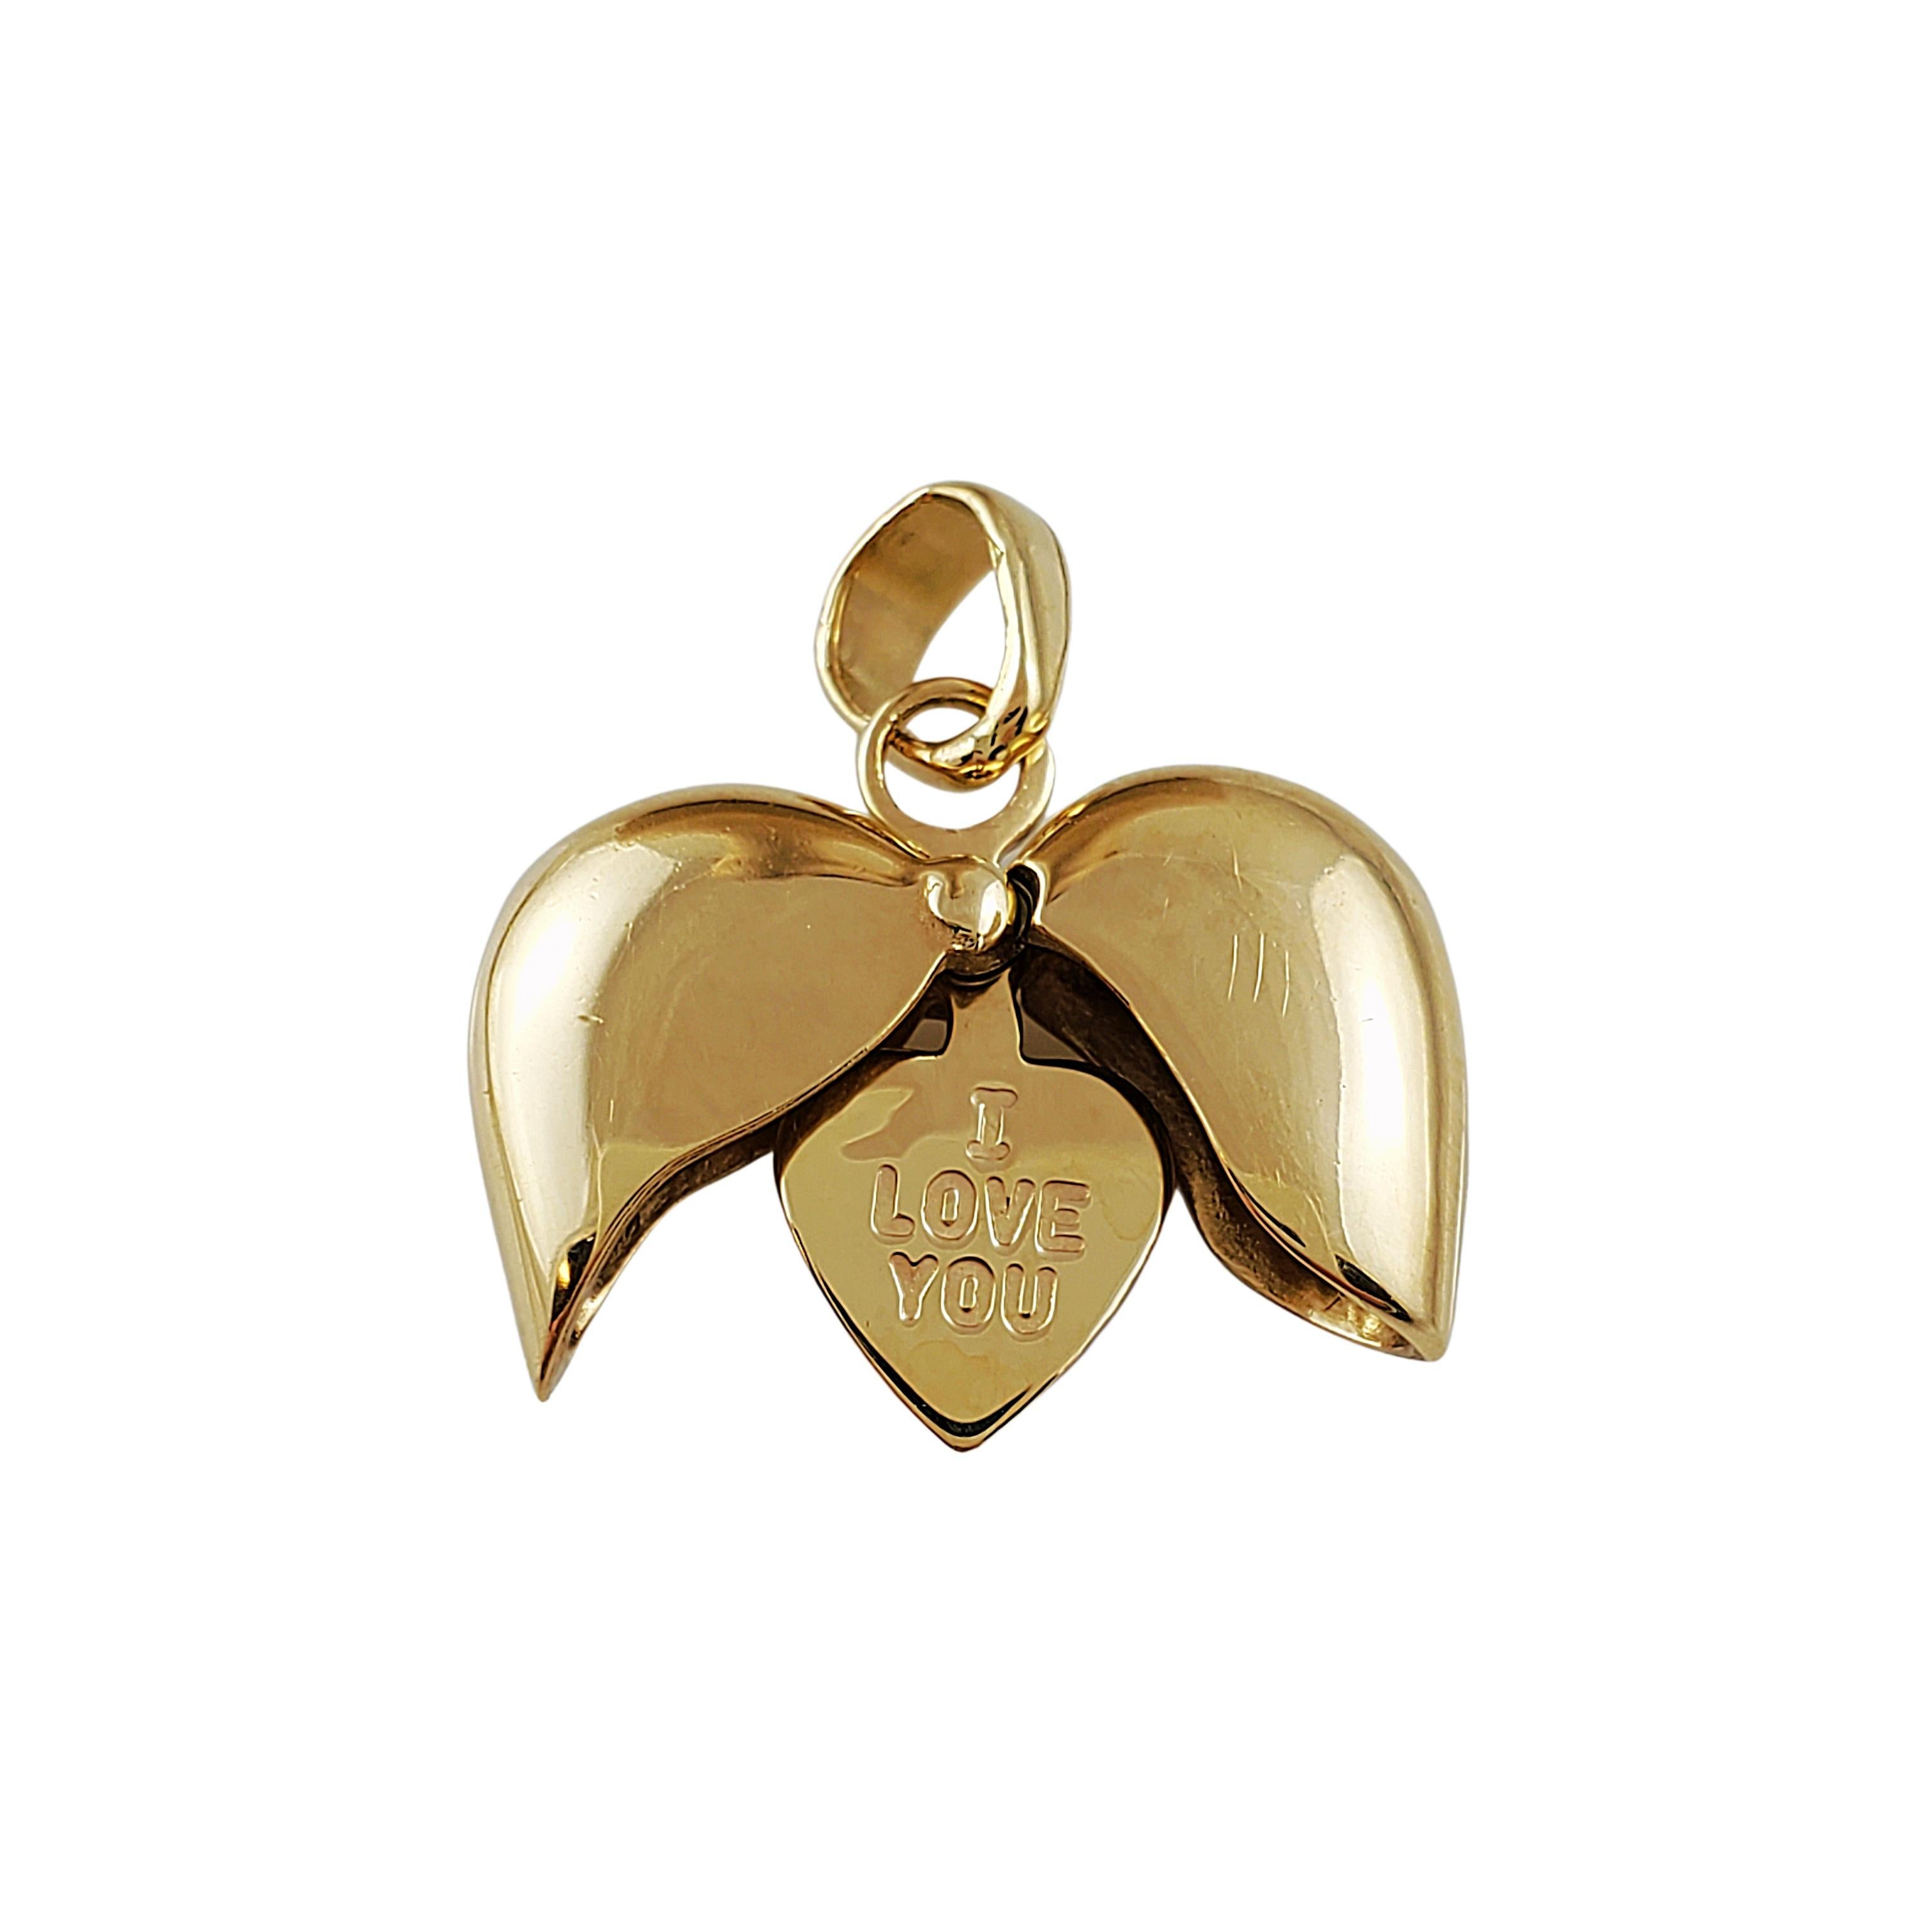 Vintage 14K Yellow Gold I Love You Heart Charm

Beautiful heart charm mechanically opens and closes to see the inscription on the inside that says 